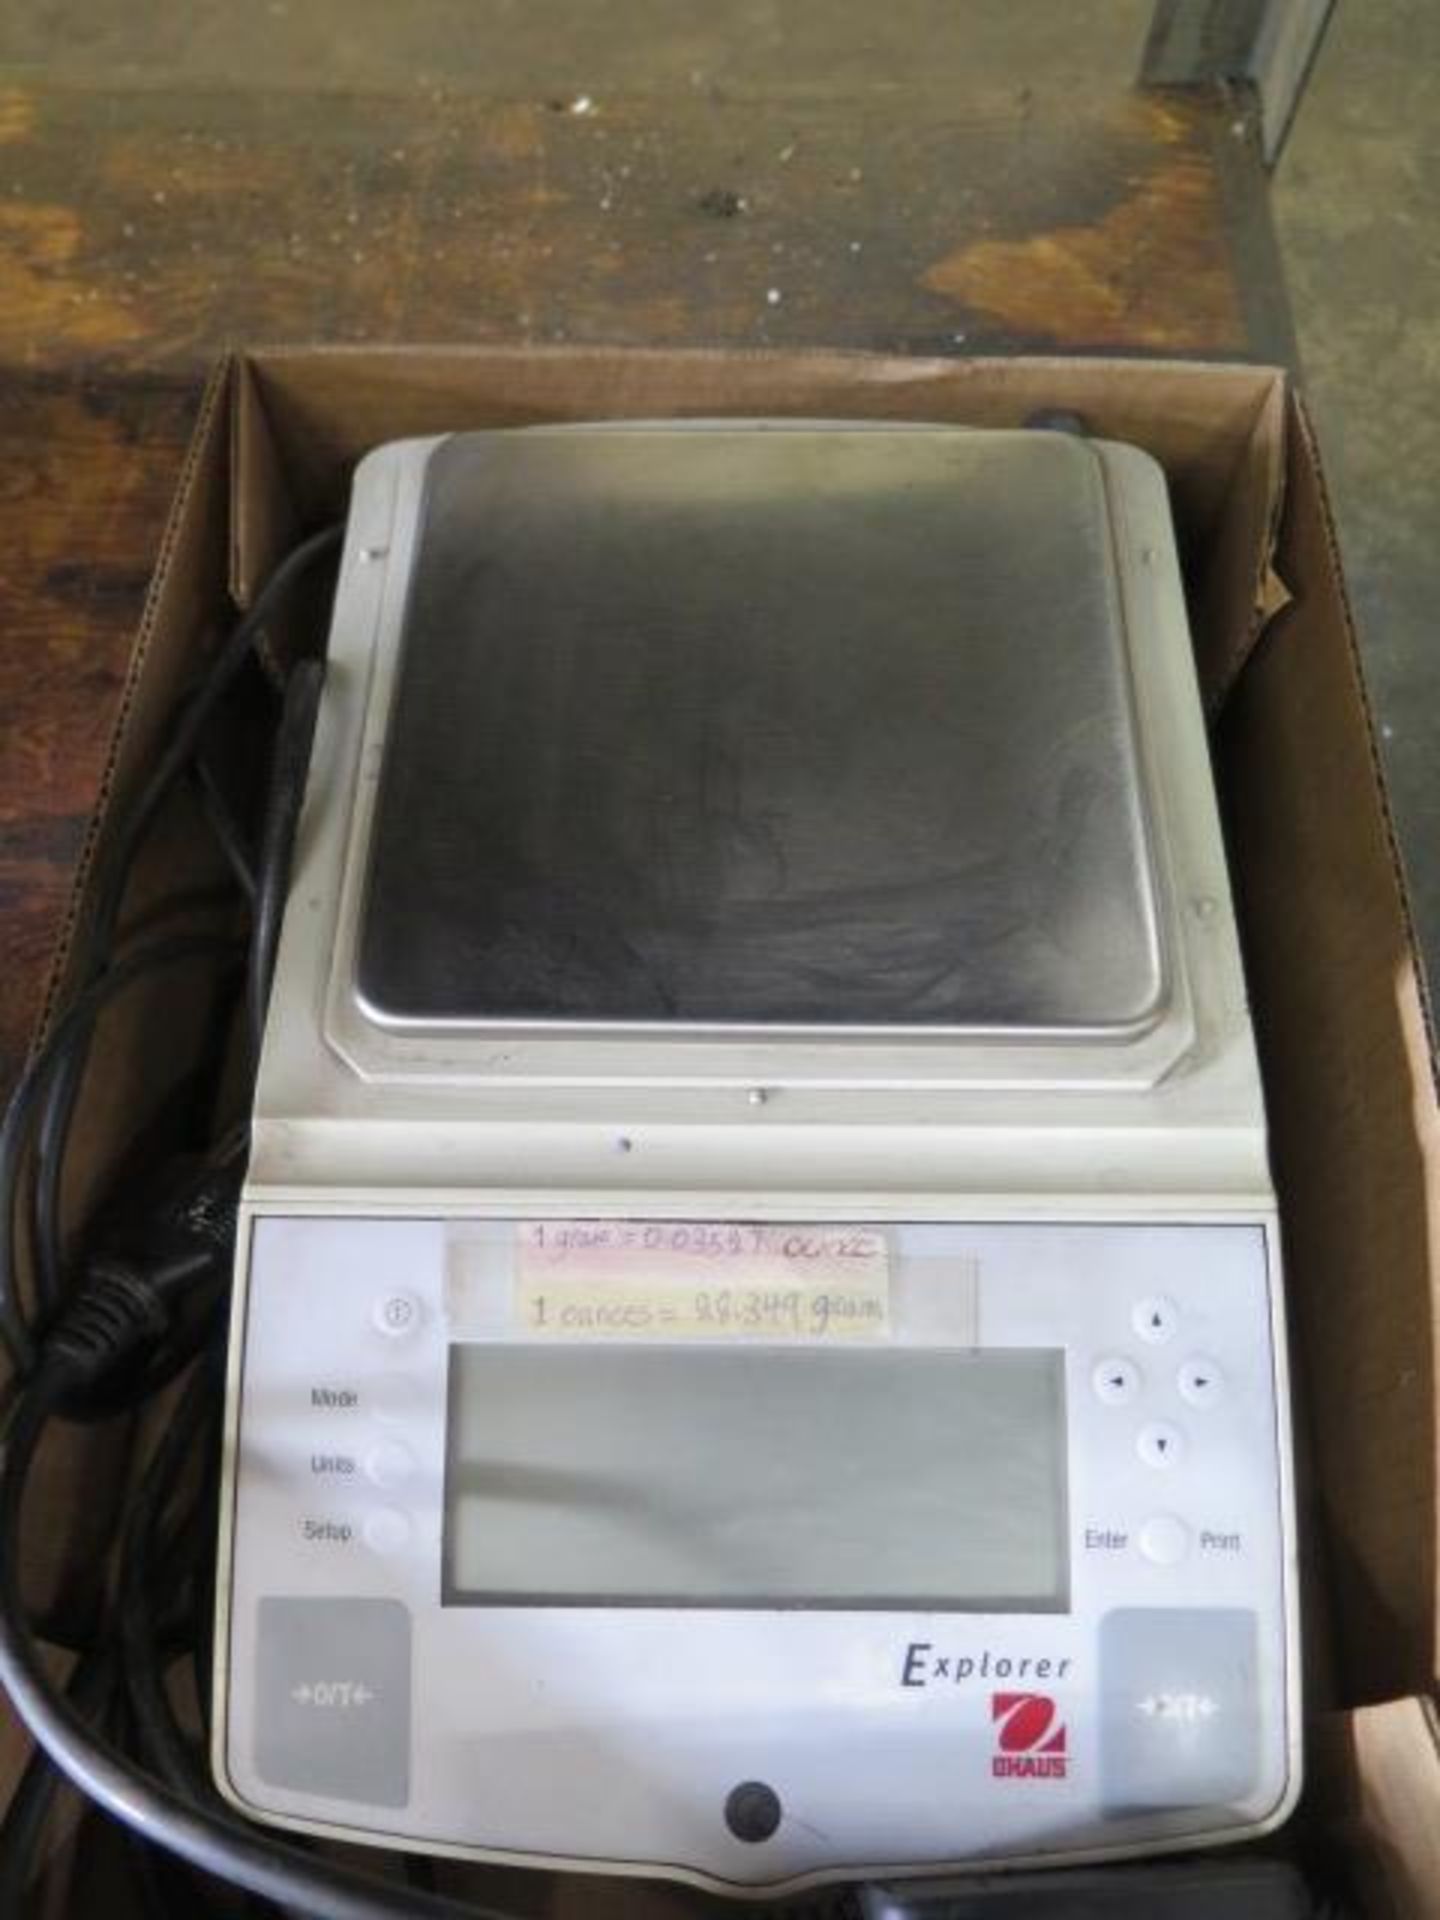 Ohaus Explorer Digital Scale (SOLD AS-IS - NO WARRANTY) - Image 2 of 3